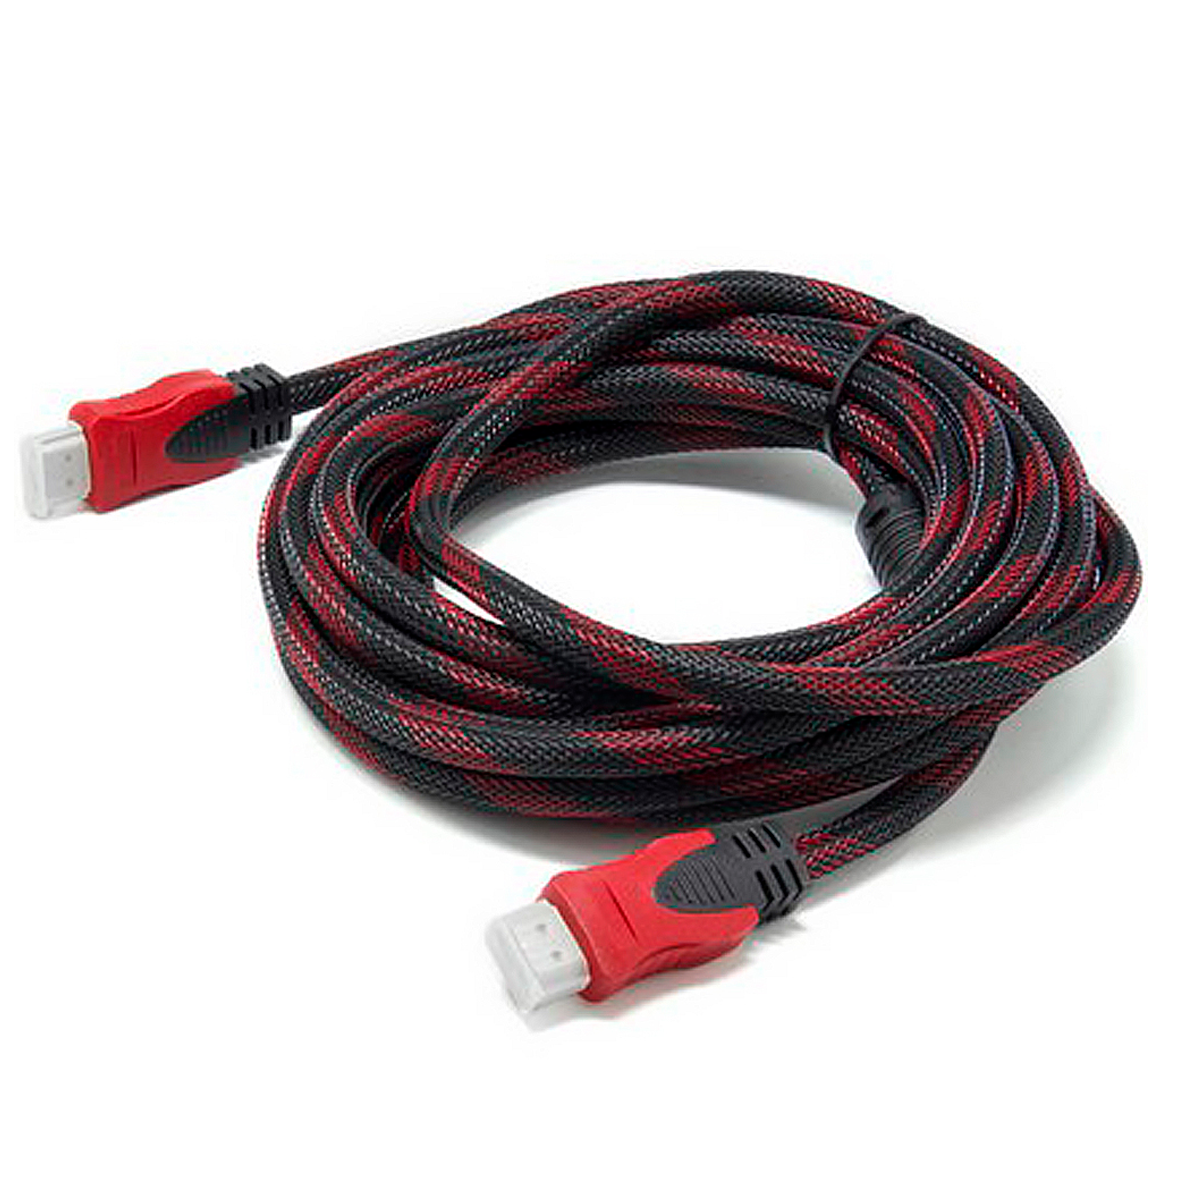 CABLE HDMI 10 METROS 4K ULTRA HD - INTELCOMEX TECHNOLOGY STORE